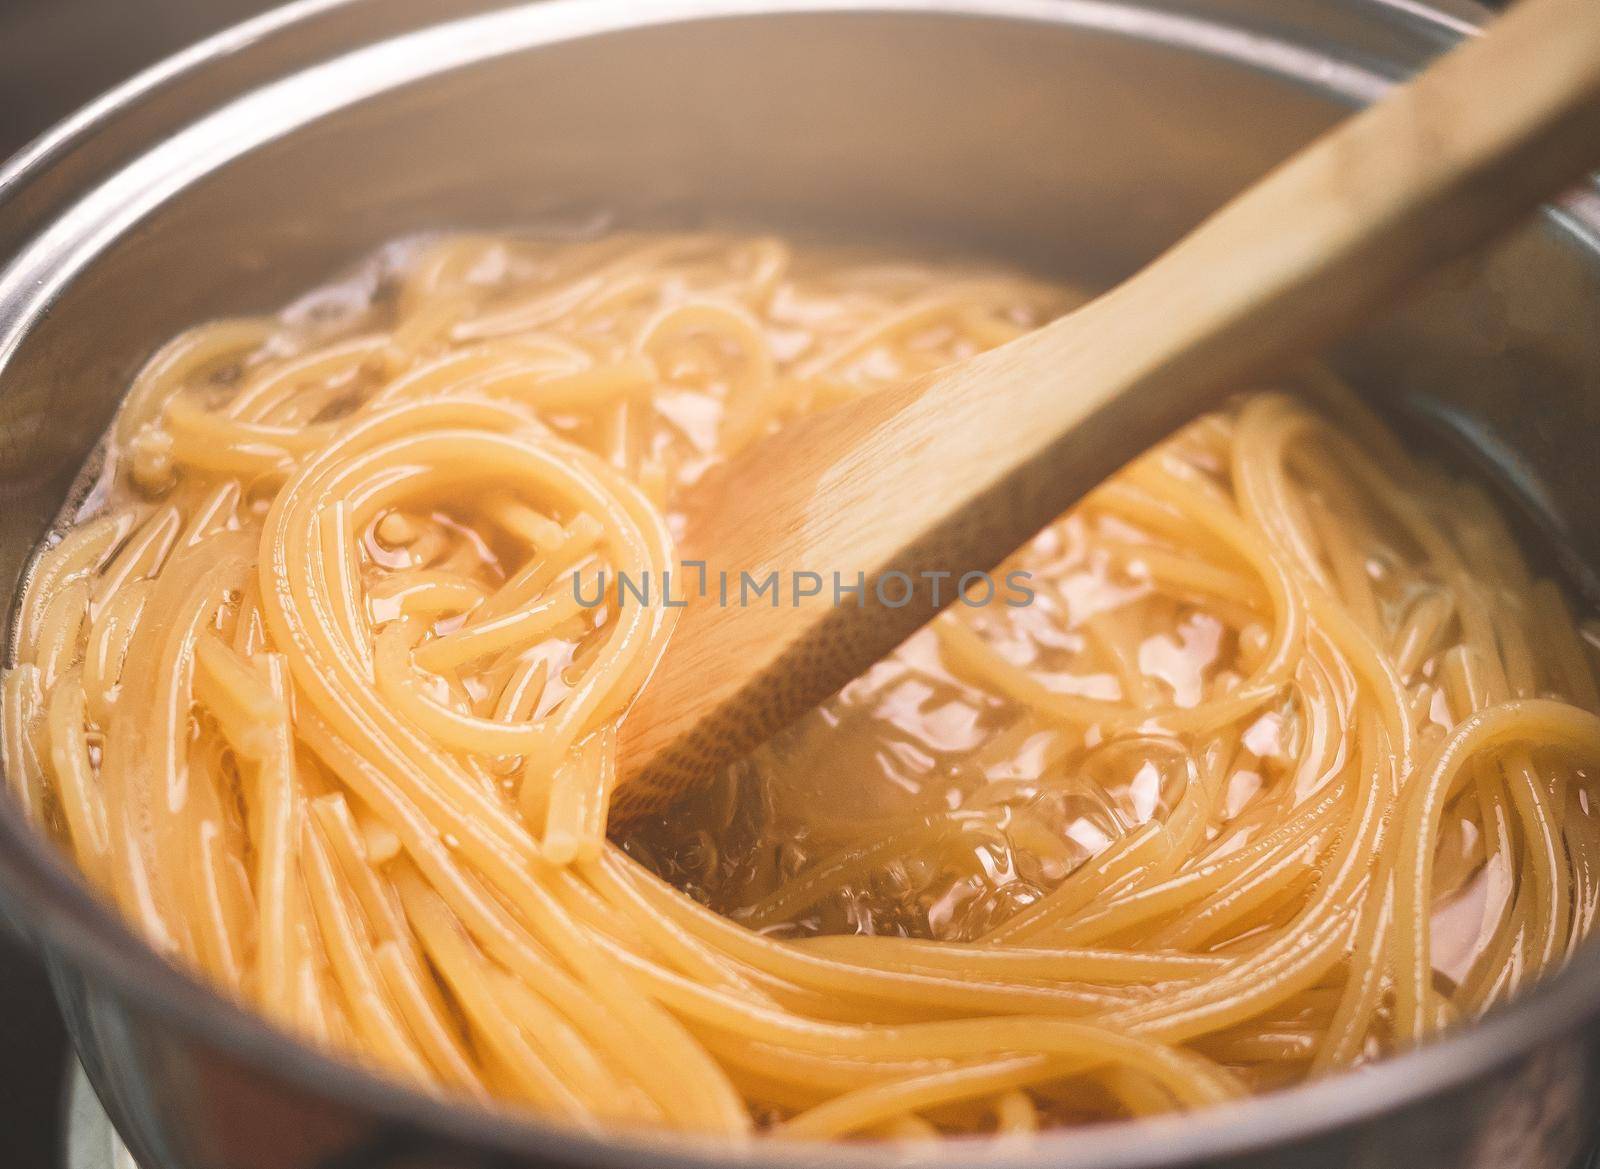 Raw spaghetti is being cooked in boiling water in a kitchen pot. Healthy Italian Food and Cooking concepts. by TEERASAK